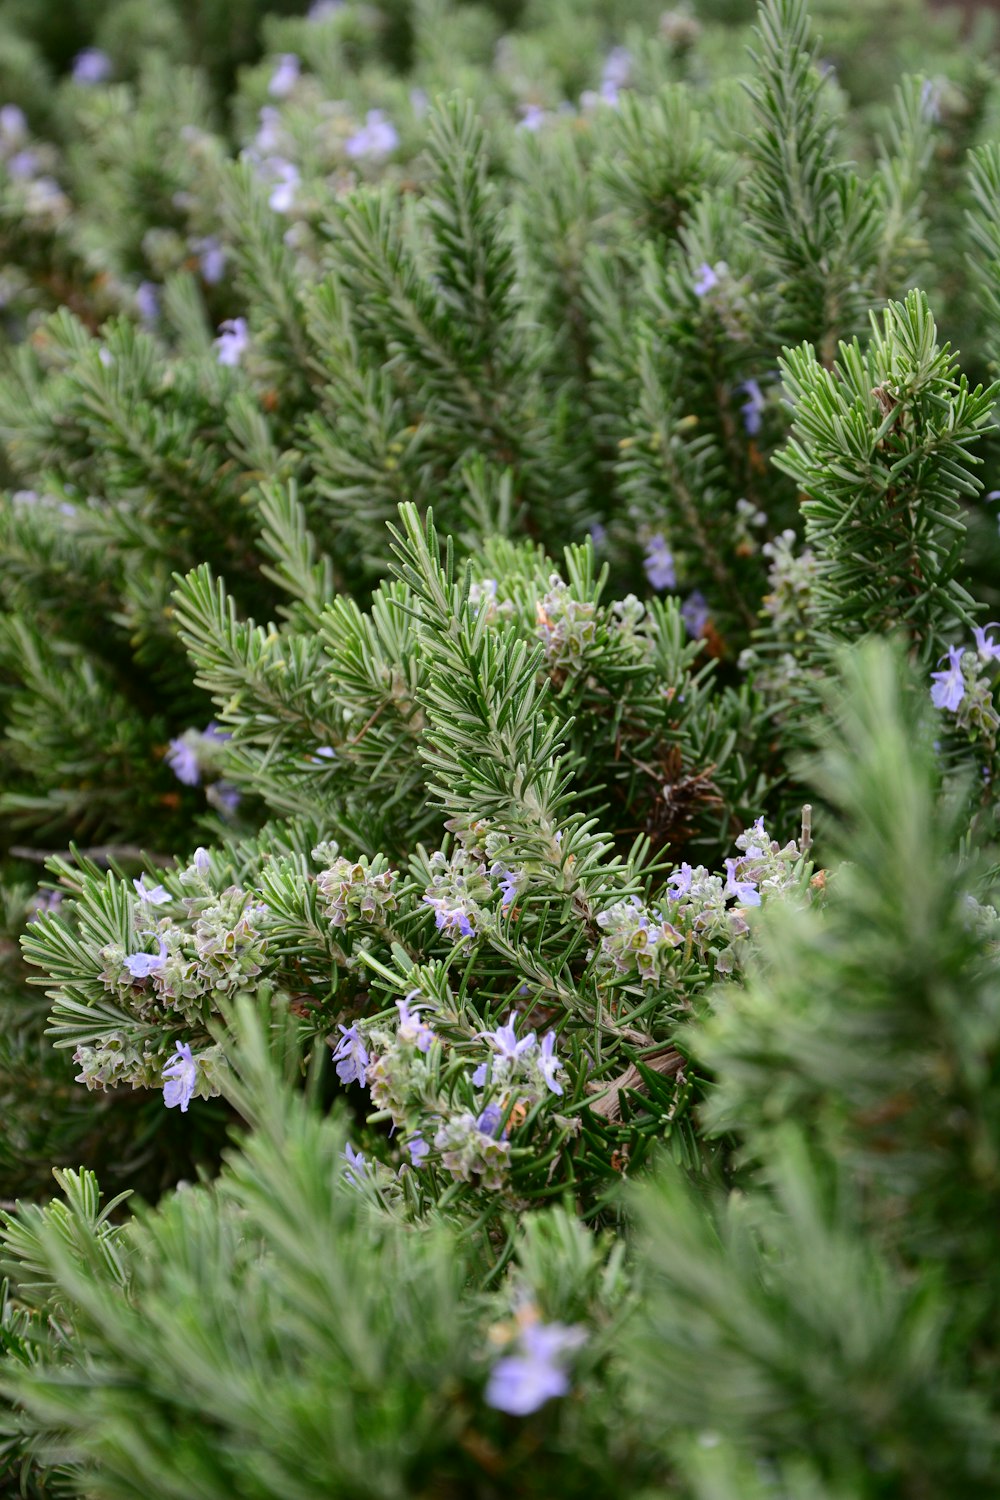 a close up of a plant with small blue flowers